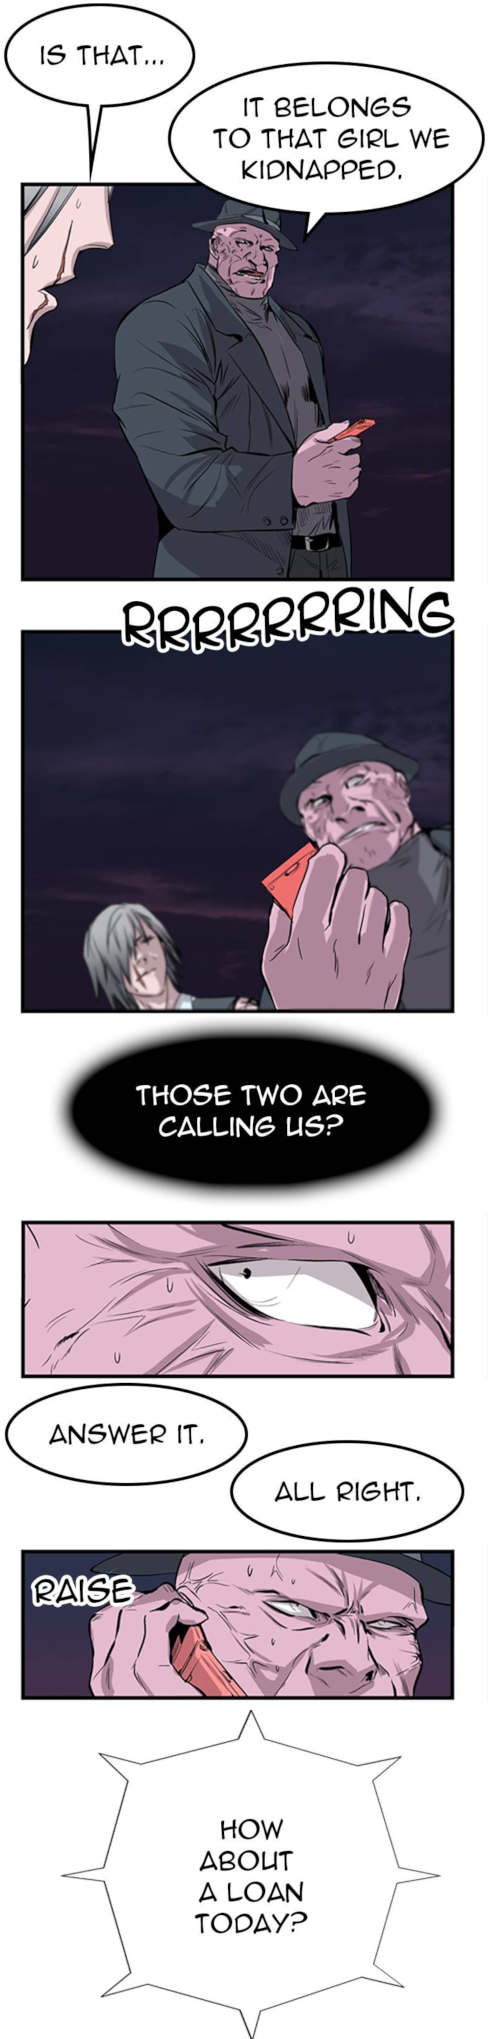 A snippet from the Noblesse webtoon, where a villain picks up a cellphone and gets a call from a loan spammer